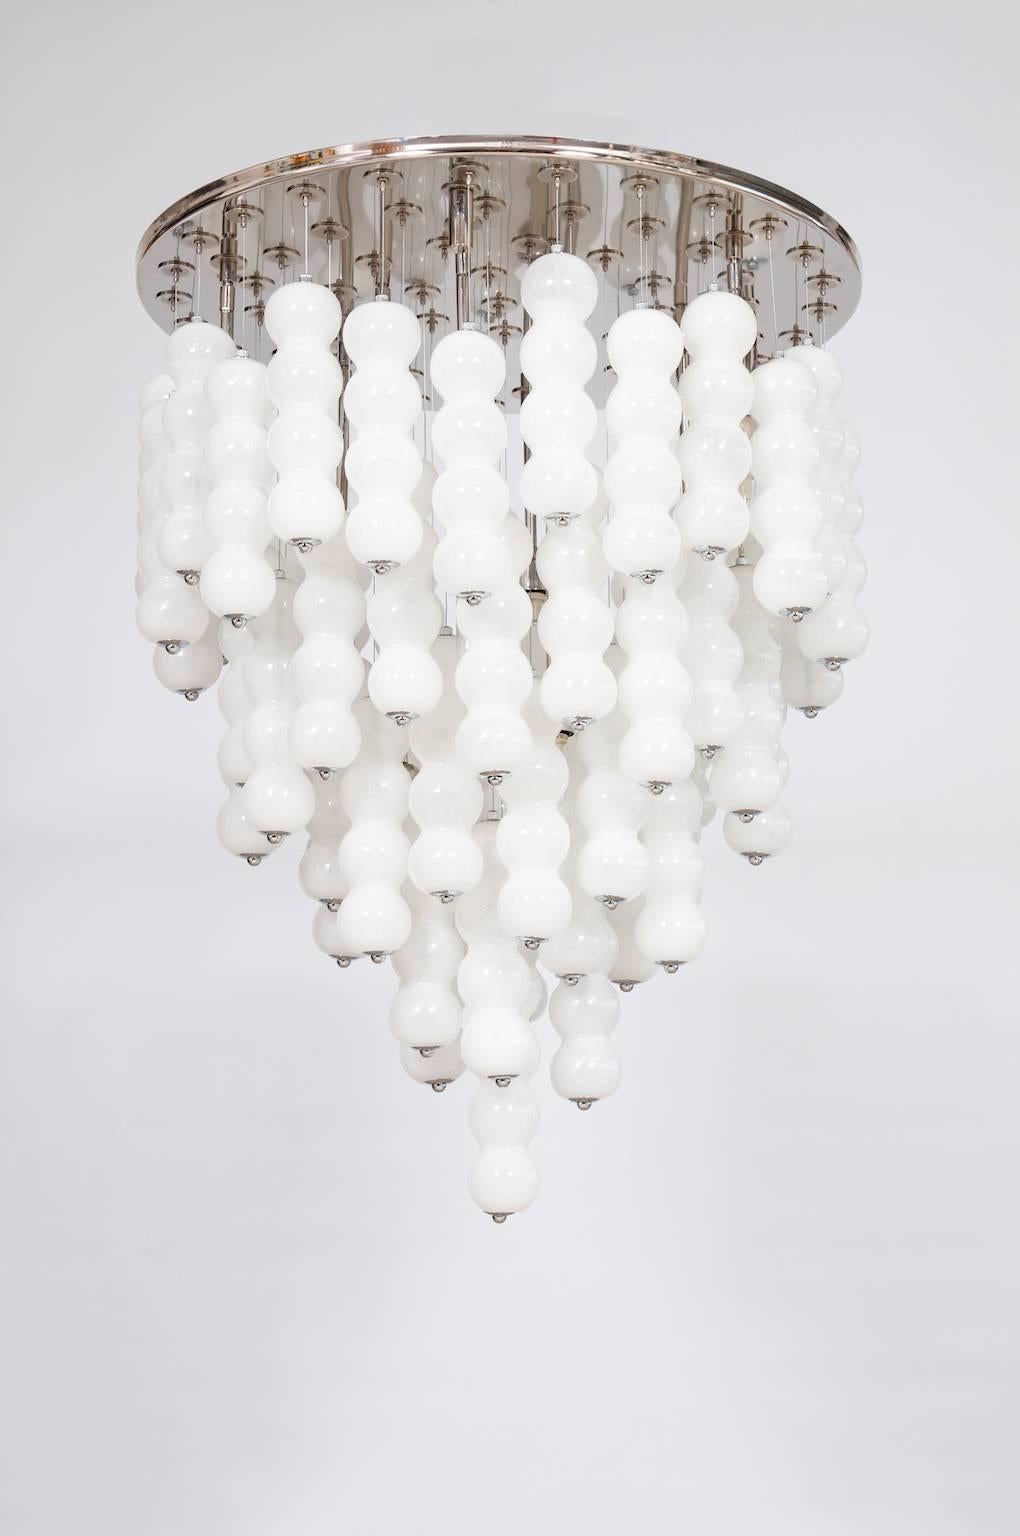 Suspension Flushmount White Spheres in Blown Murano Glass Mazzega 1990 Italy
Elegant and massive Italian Venetian flushmount in Murano glass with white spheres composed by elegant long white glass elements suspended with a thread of steel, all is